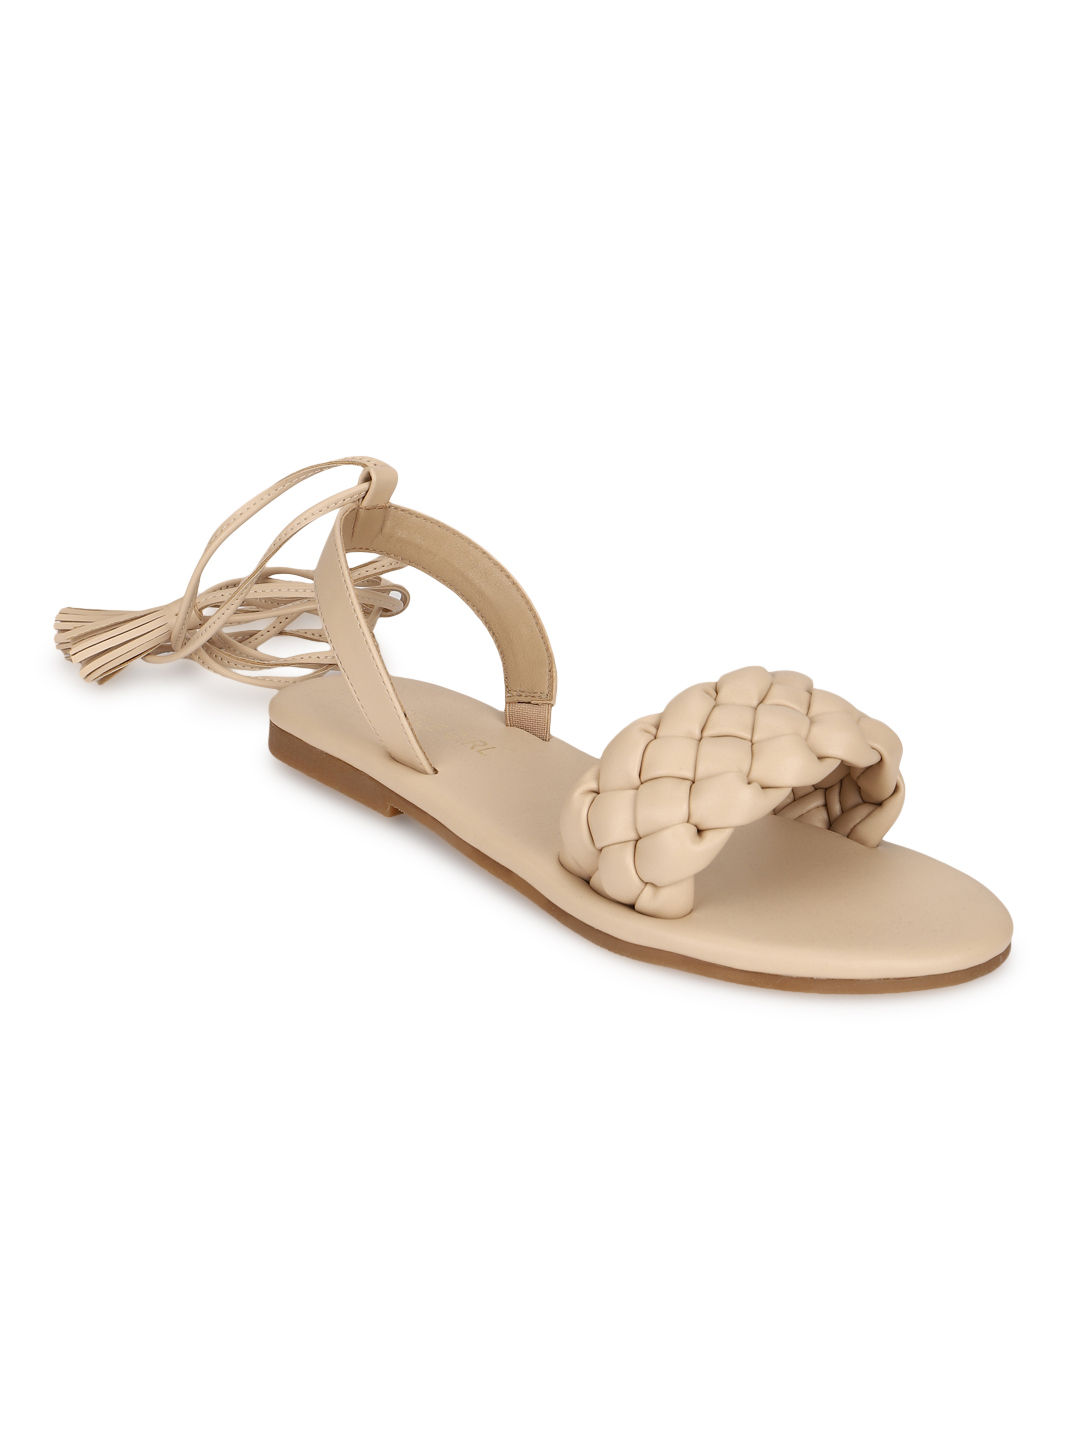 Buy White Heeled Sandals for Women by Everqupid Online  Ajiocom